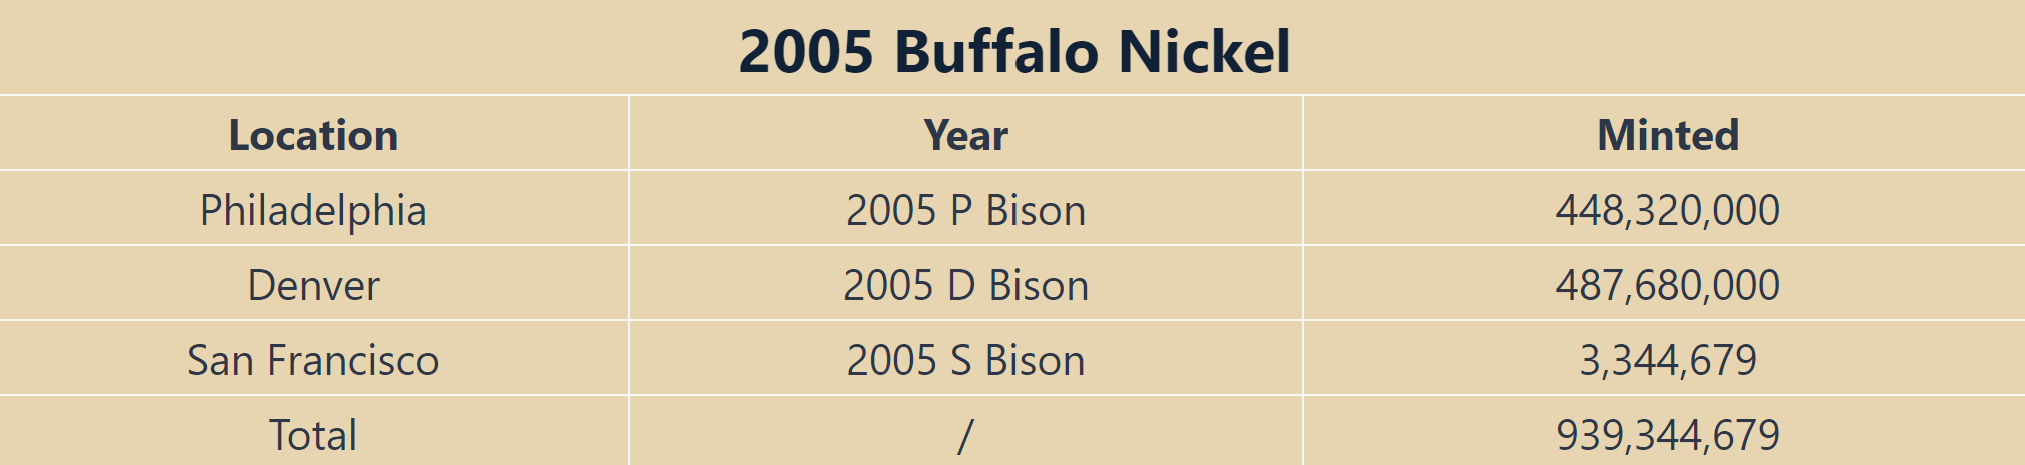 History Of The 2005 Buffalo Nickel - US COIN APPS